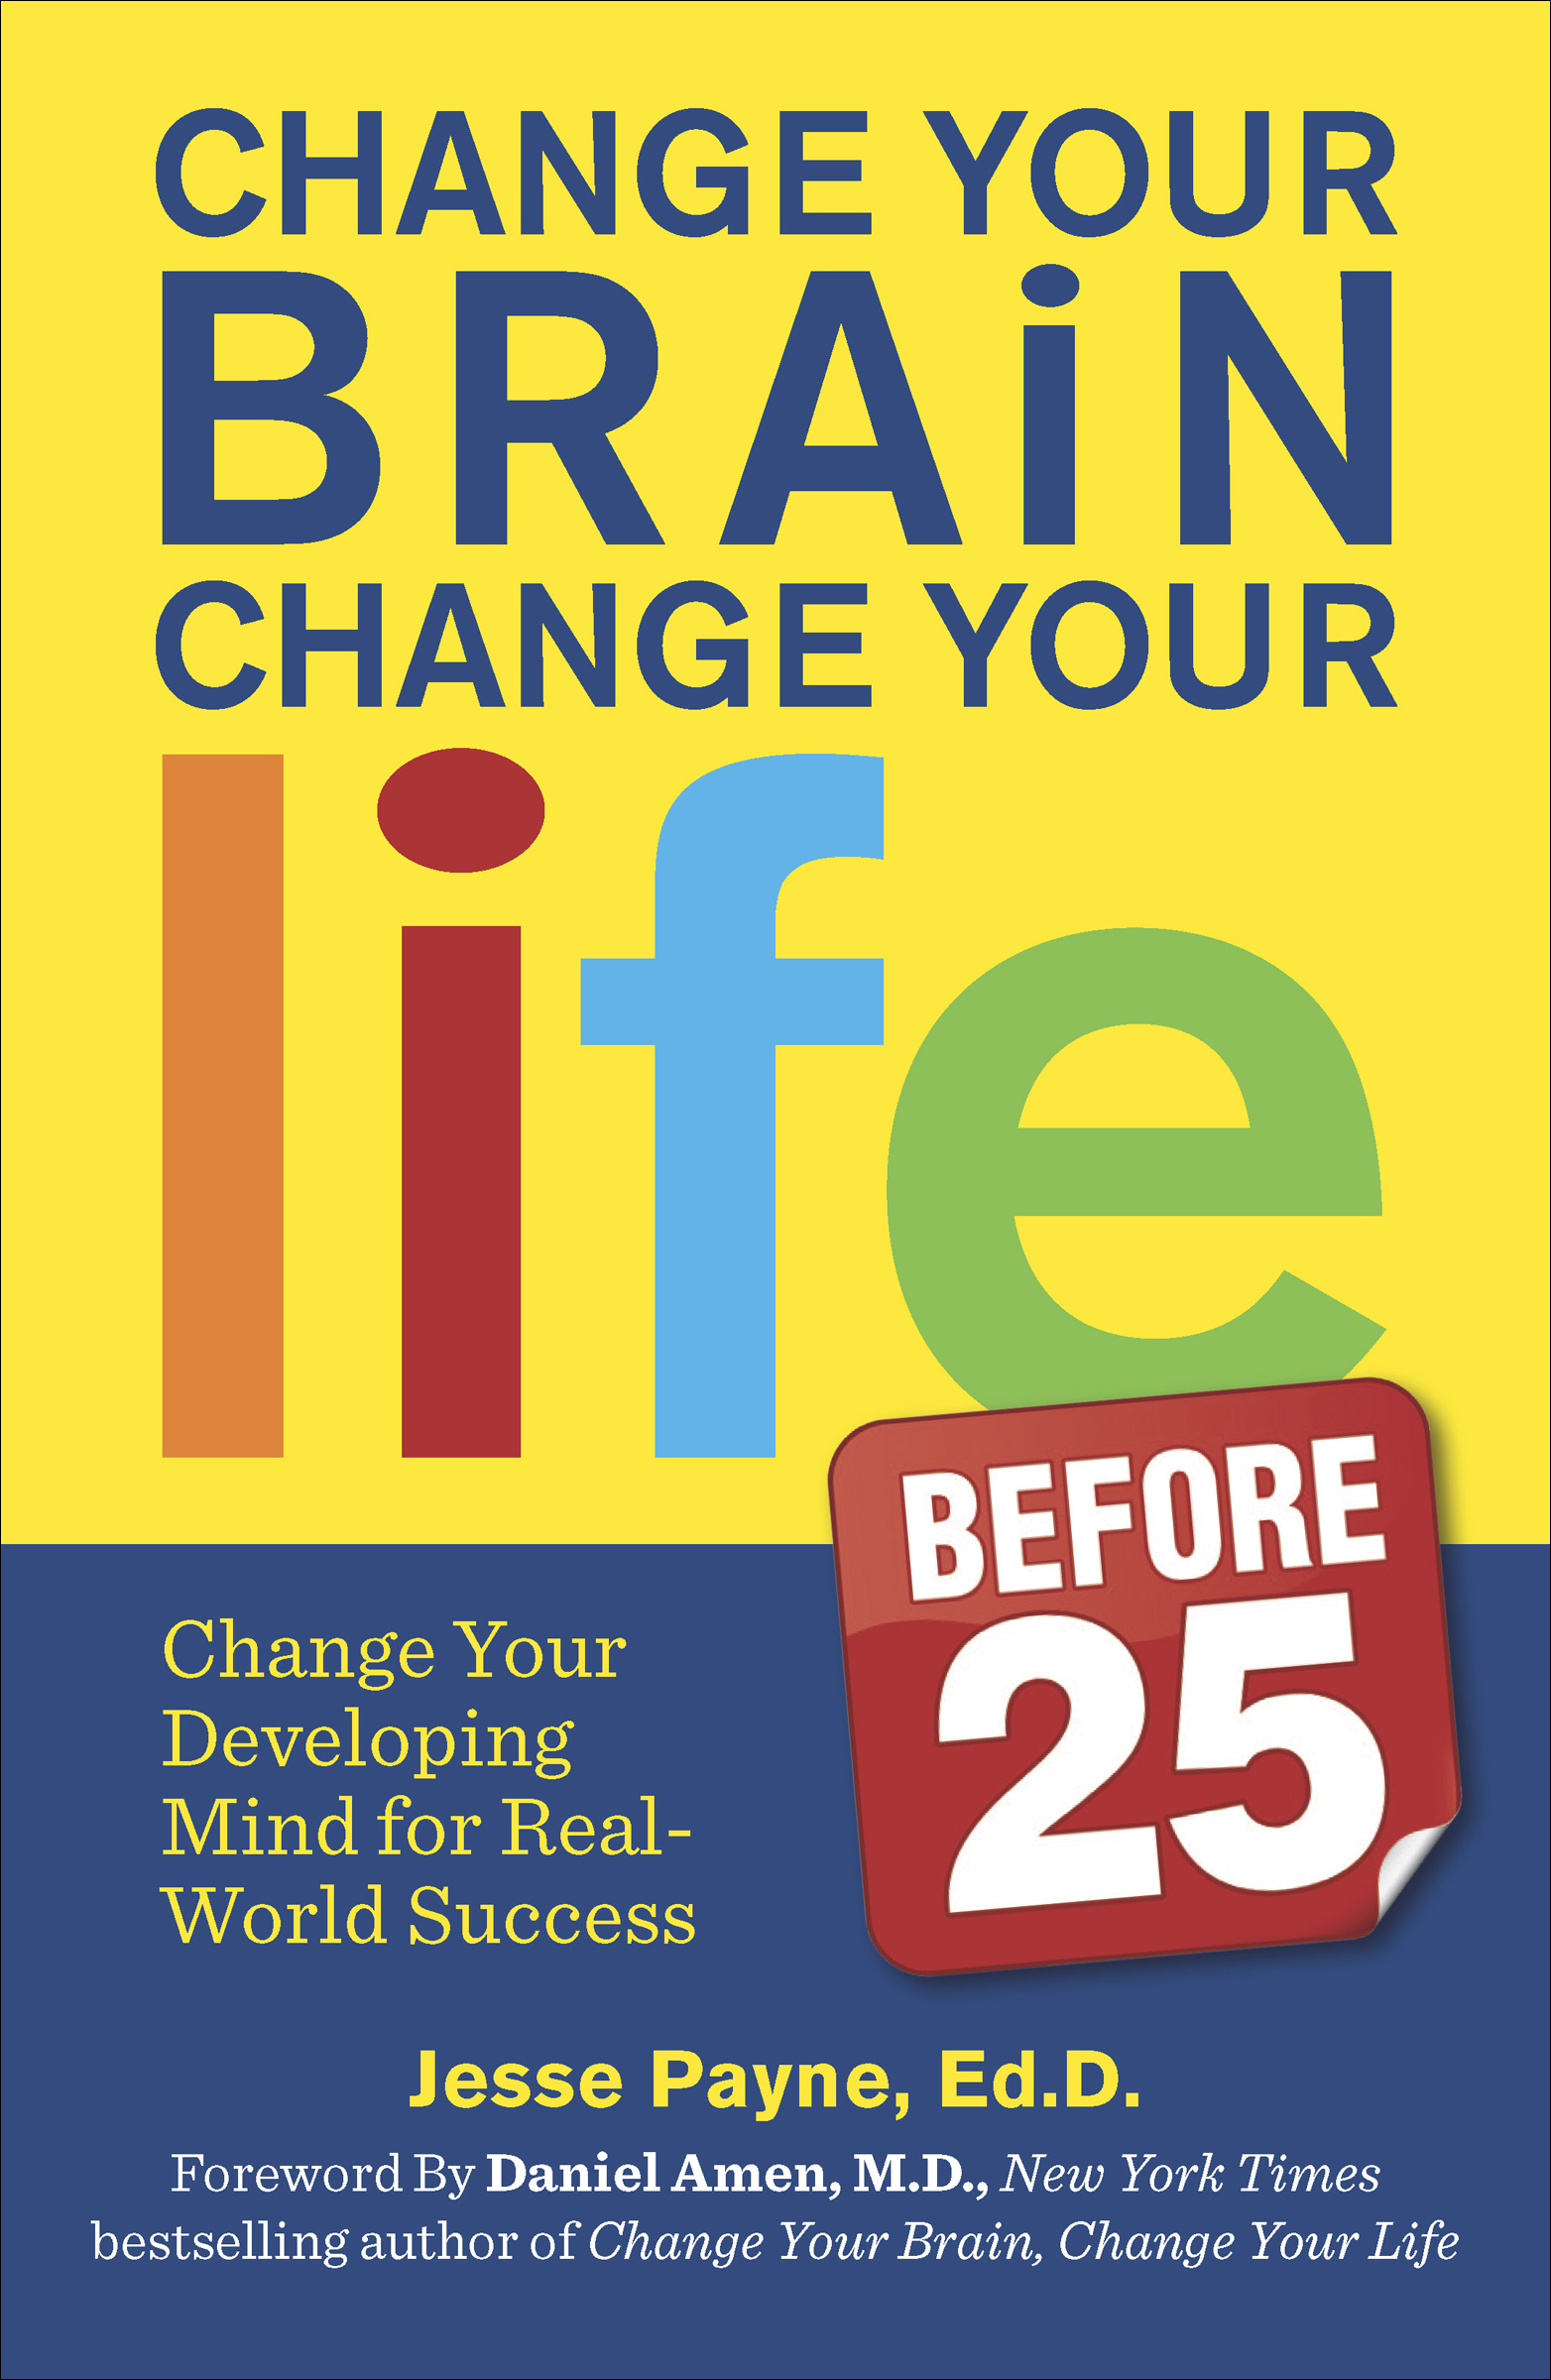 Change your brain, change your life (Before 25) Change Your Developing Mind for Real World Success cover image